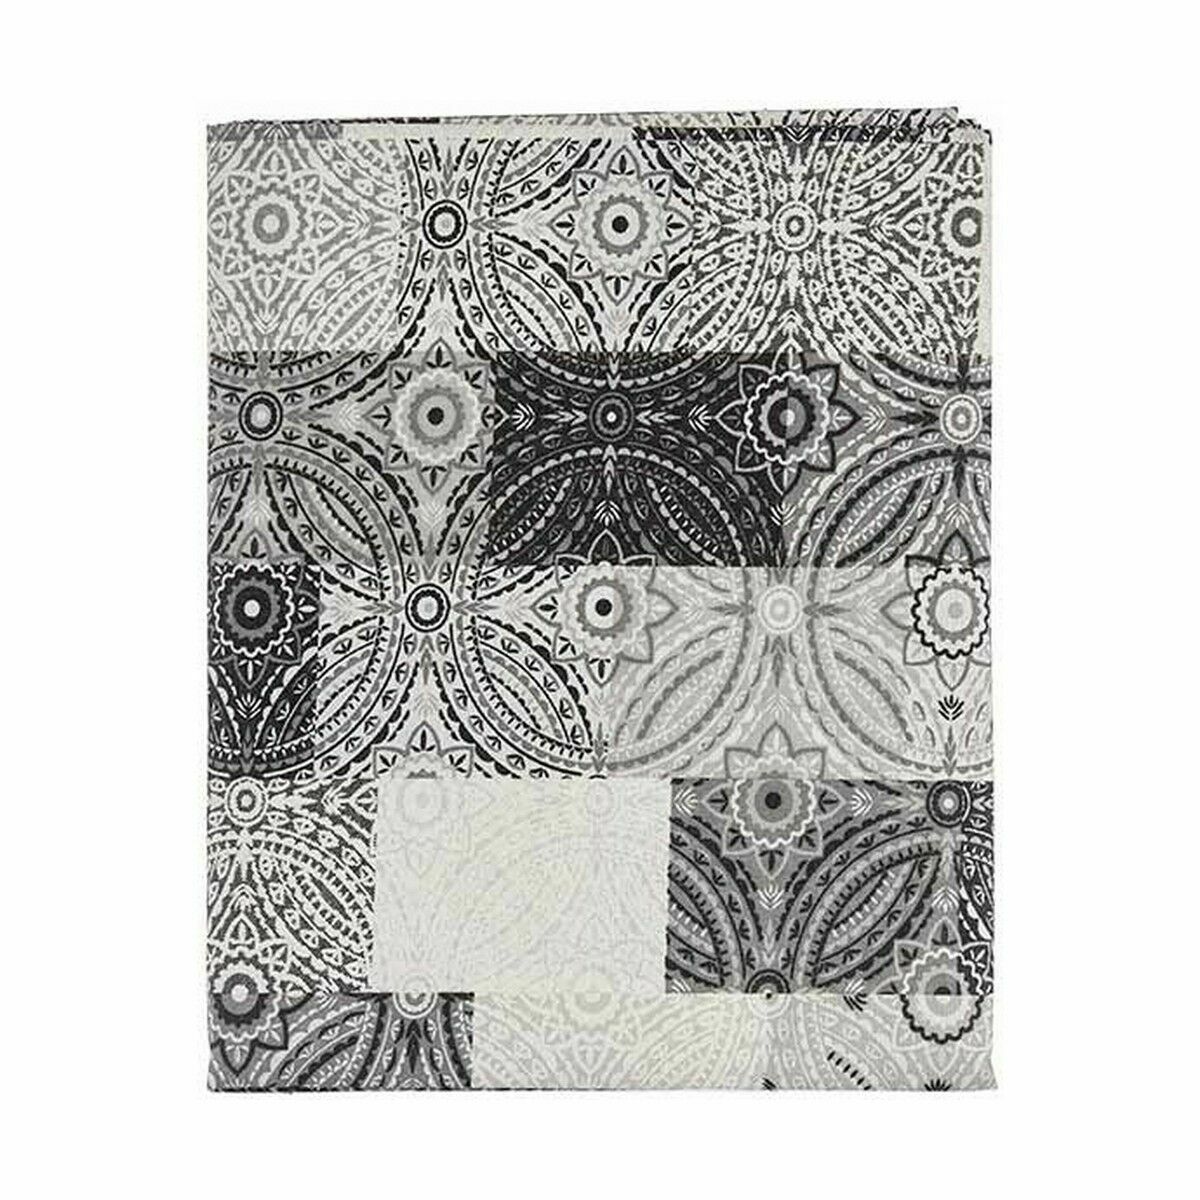 Tablecloth Thin canvas Anti-stain Tile 140 x 180 cm Grey (6 Units)